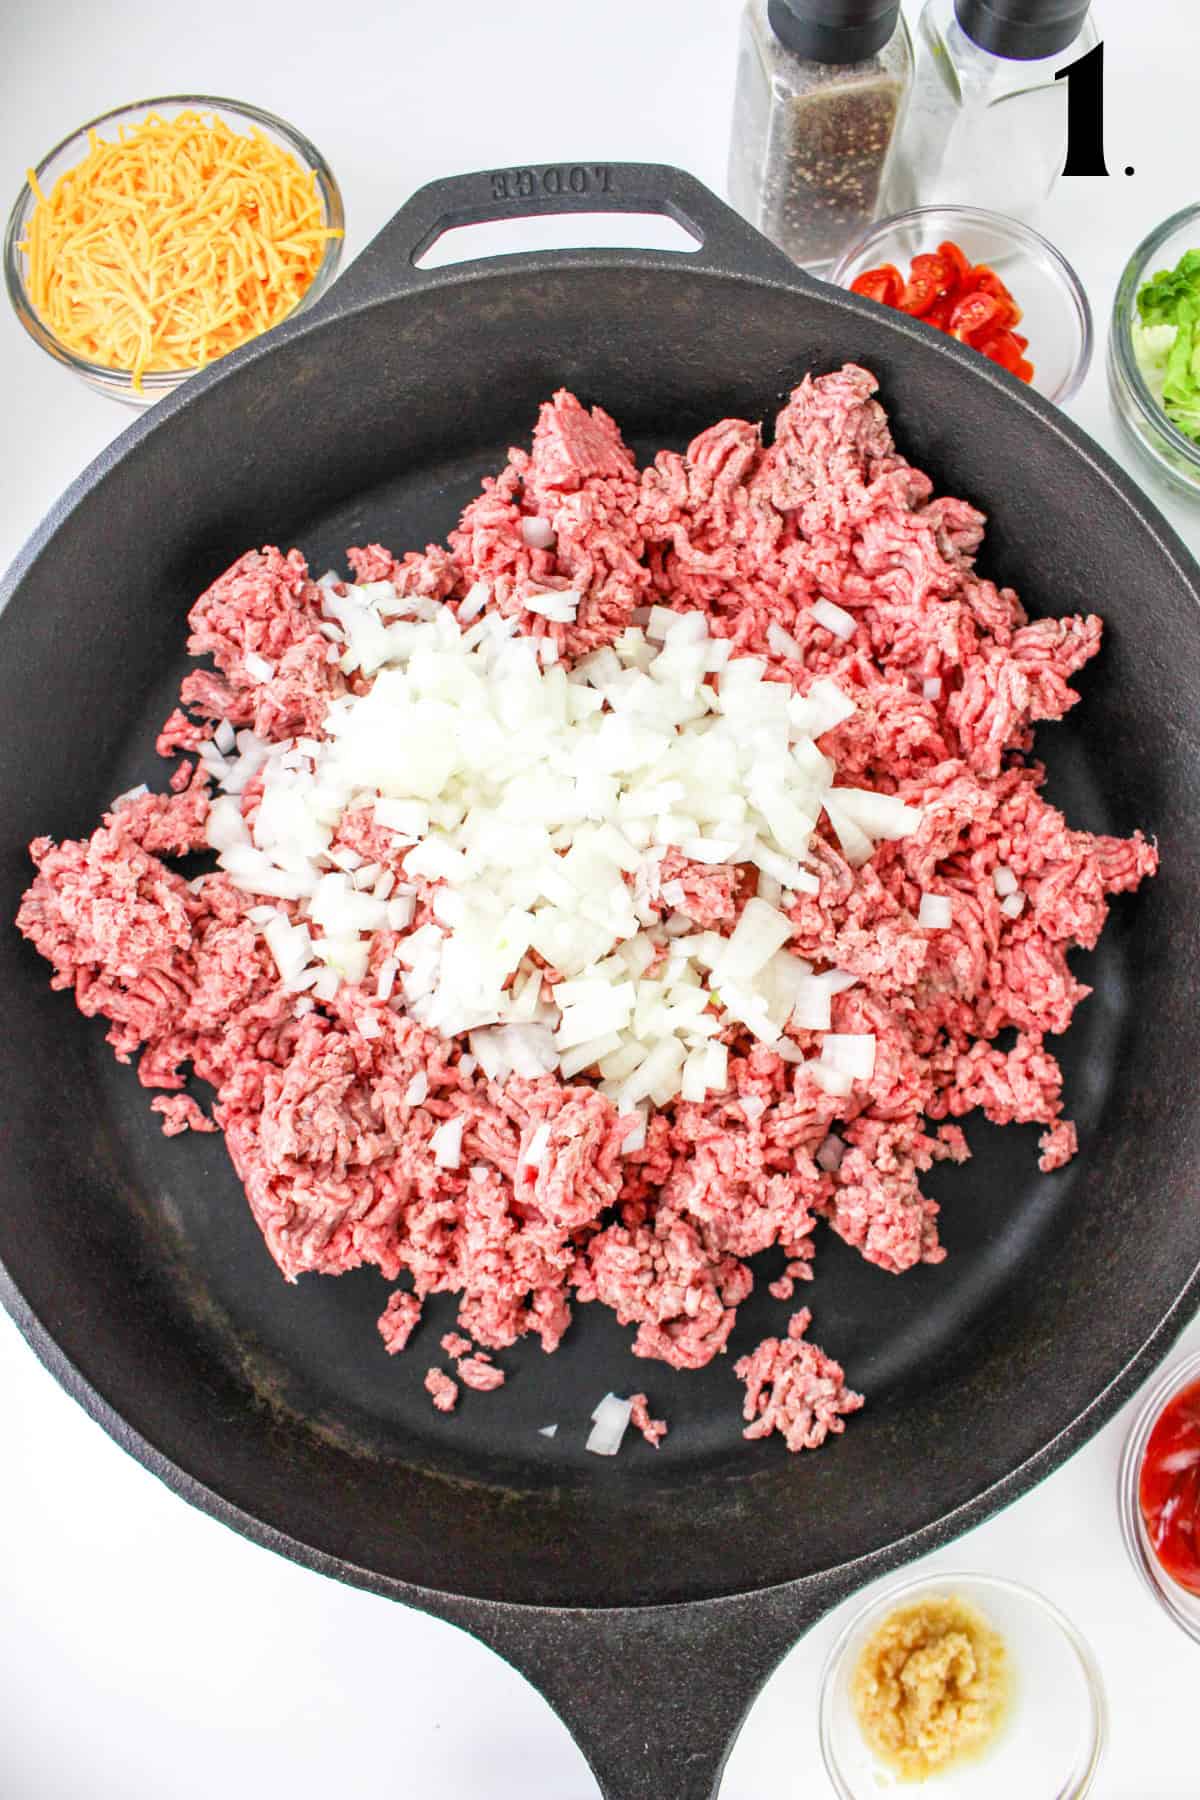 How to Make Cheeseburger Pasta - Step 1 - ground beef and onions in pan.